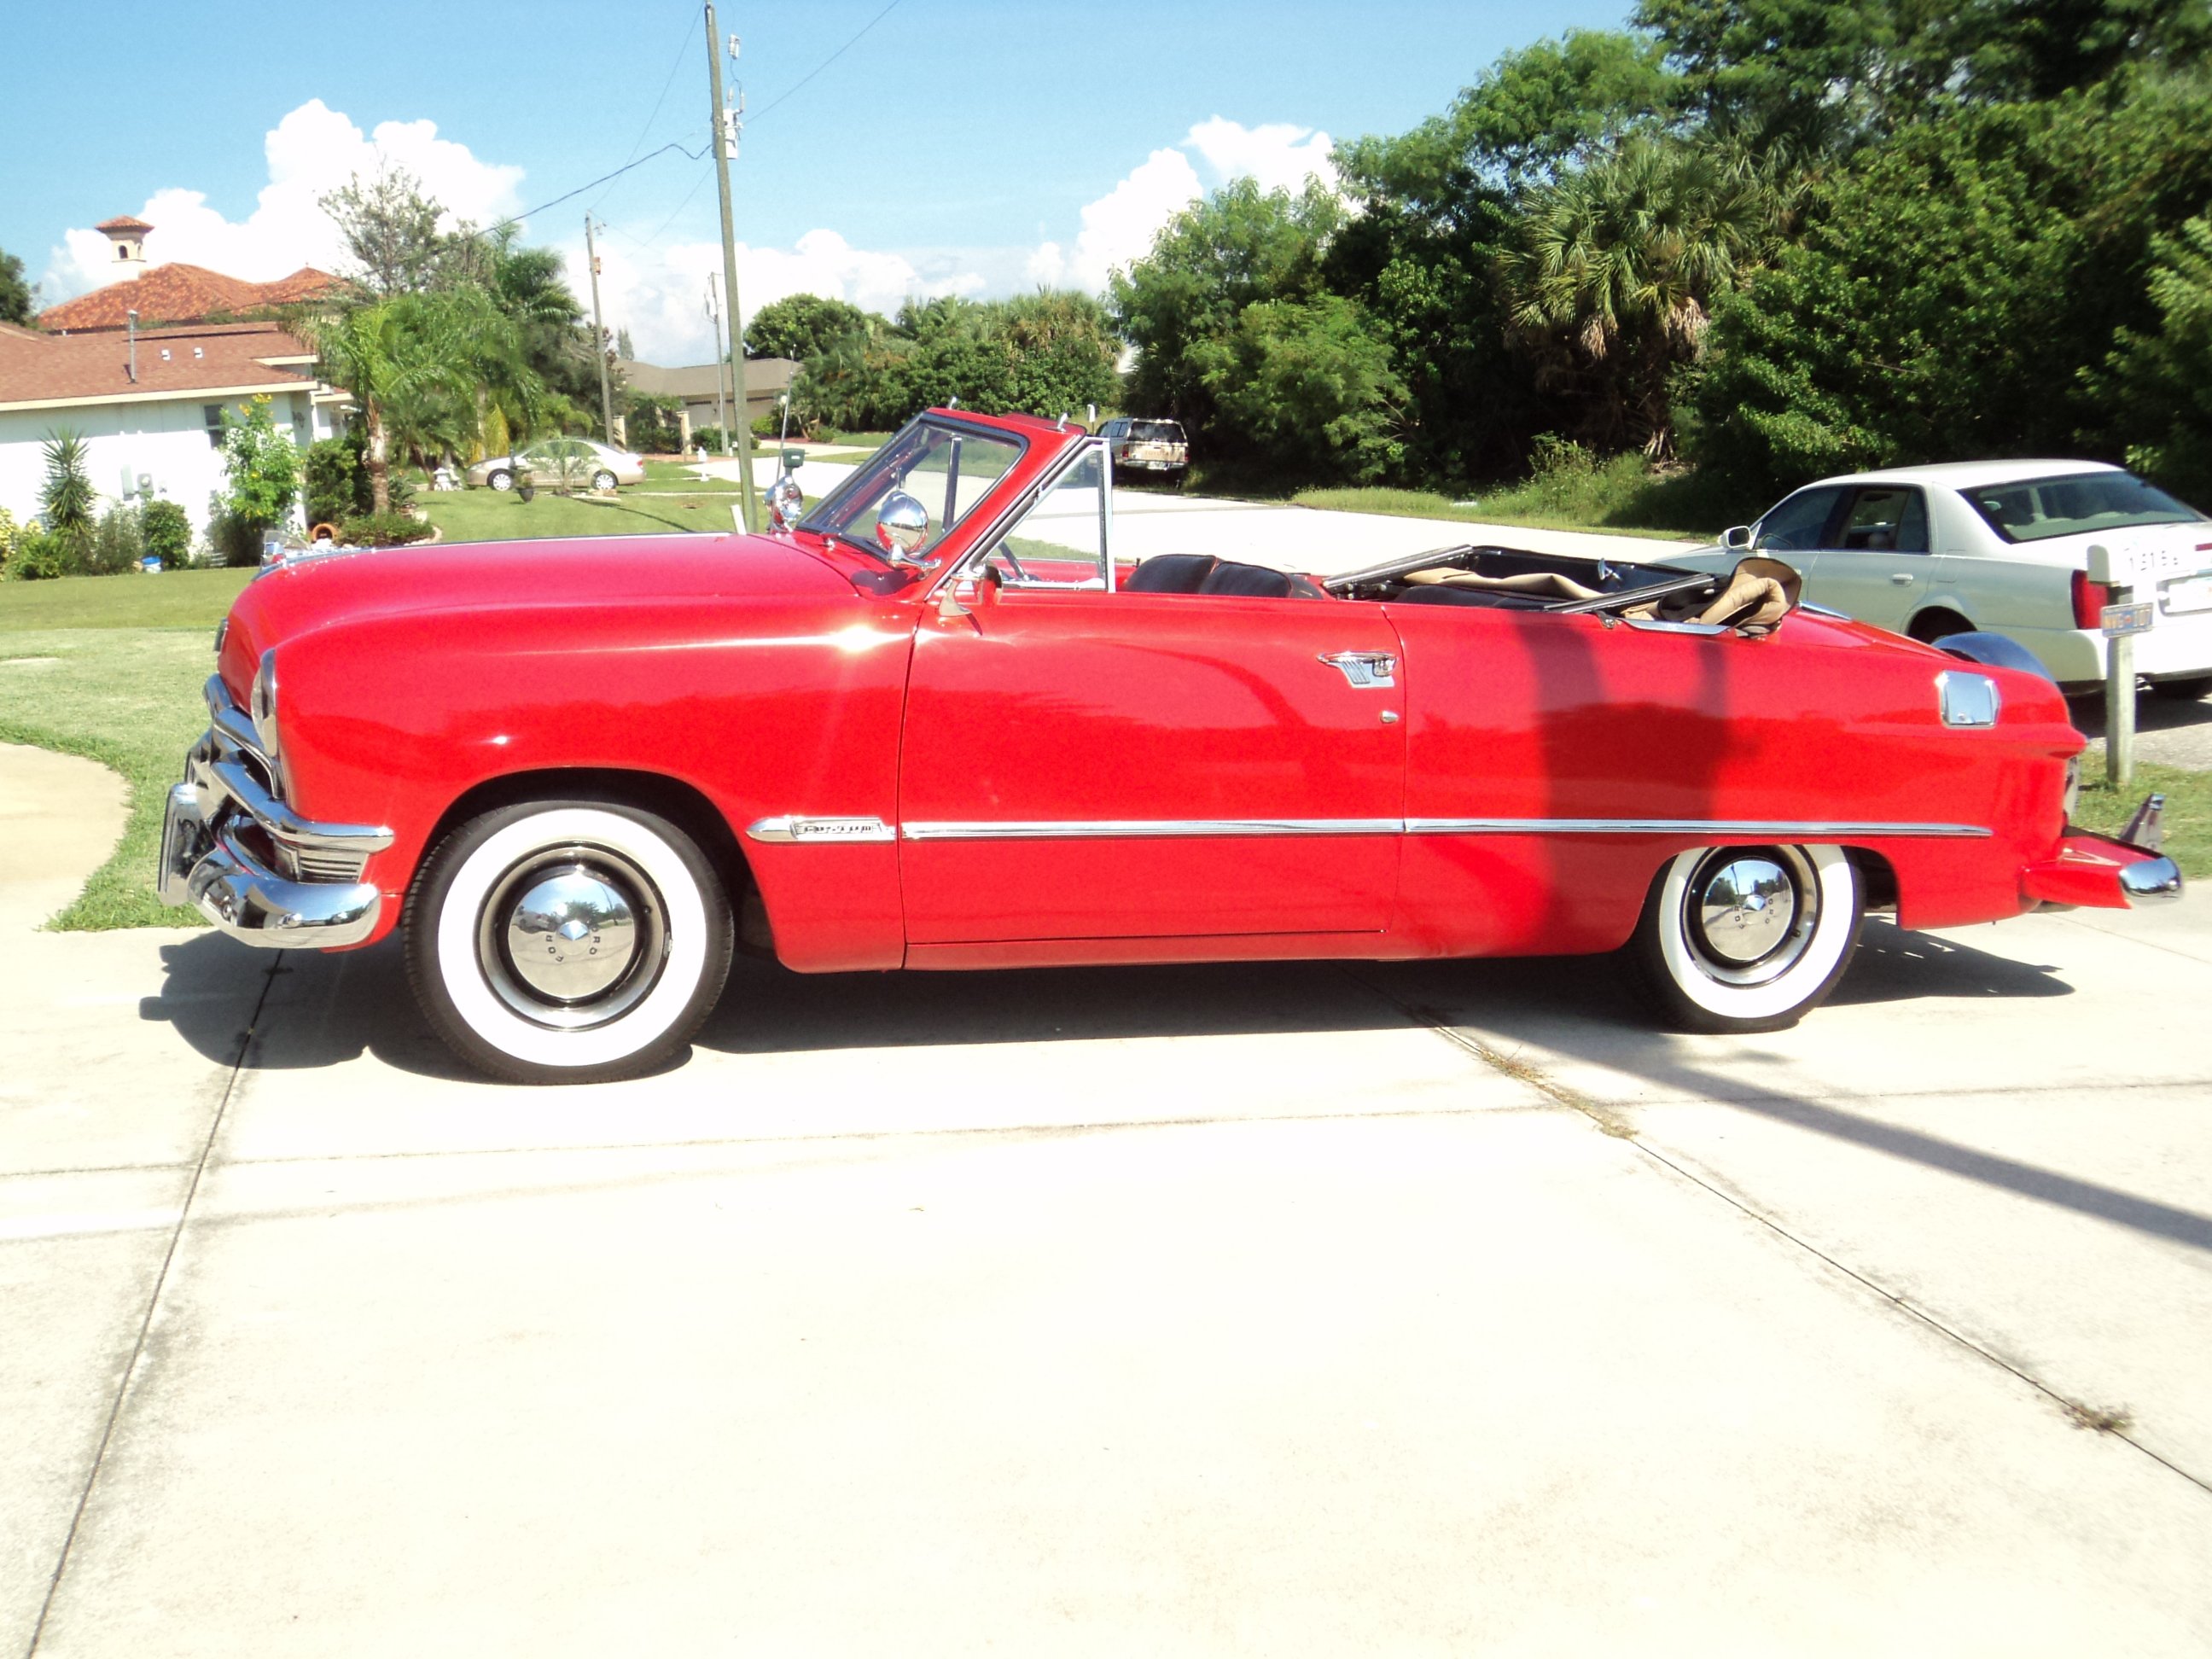 1950, Ford, Custonline, Deluxe, Convertible, Red, Classic, Old, Vintage, Original, Usa, 2592x1944 14 Wallpaper